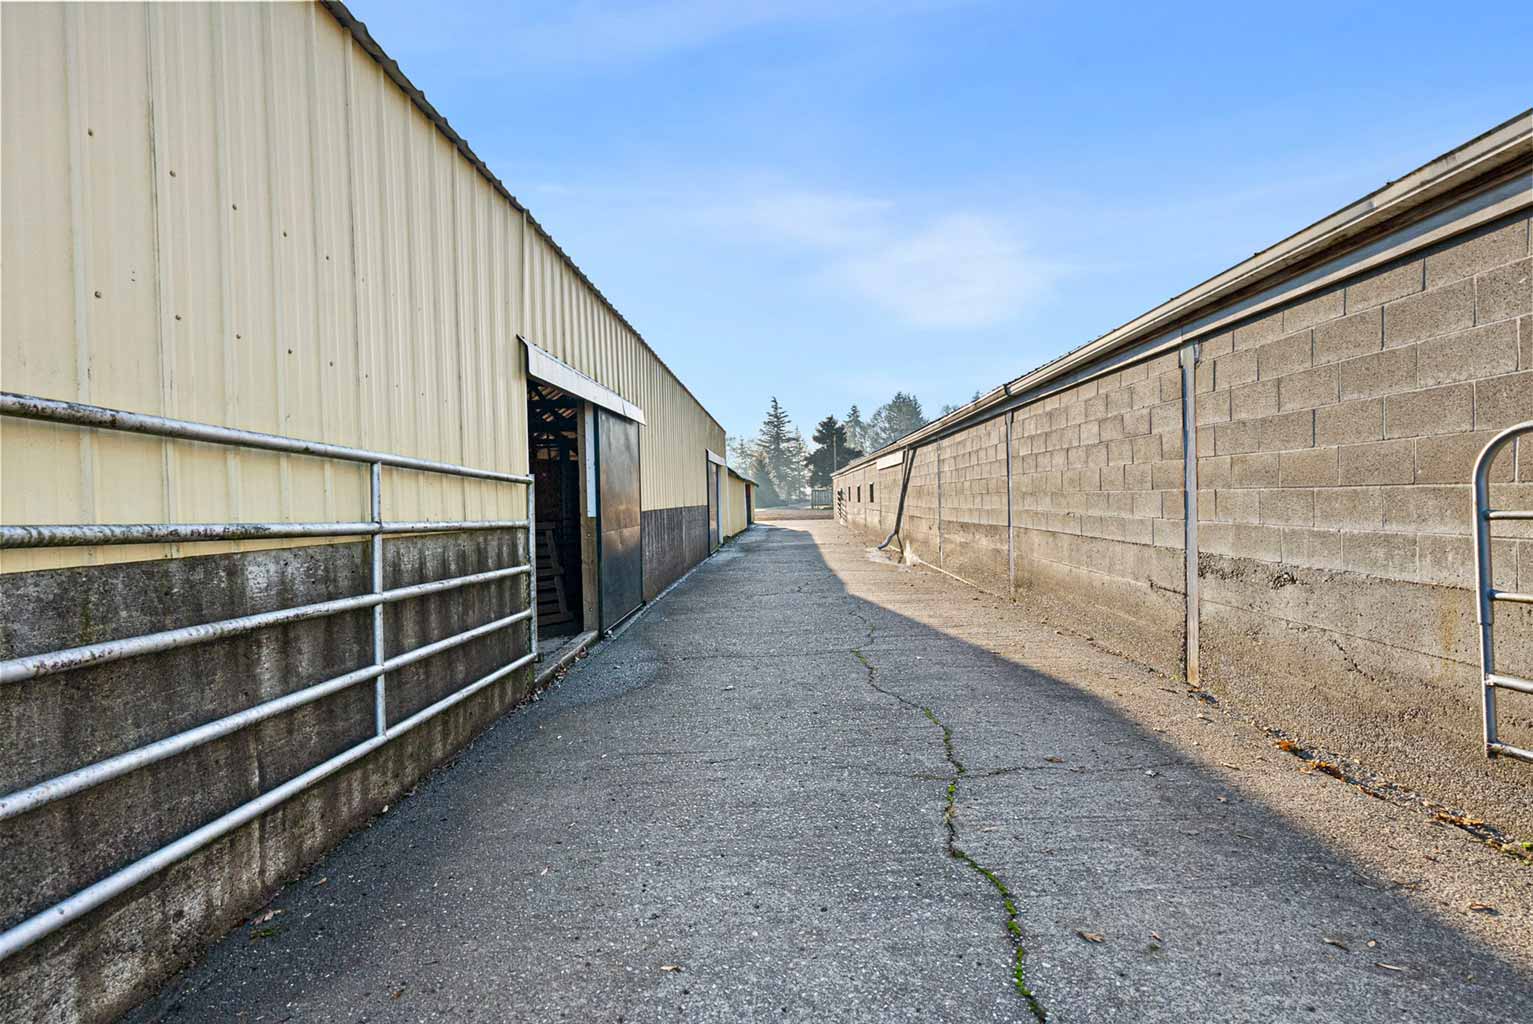 Concrete aisle separates the two barns